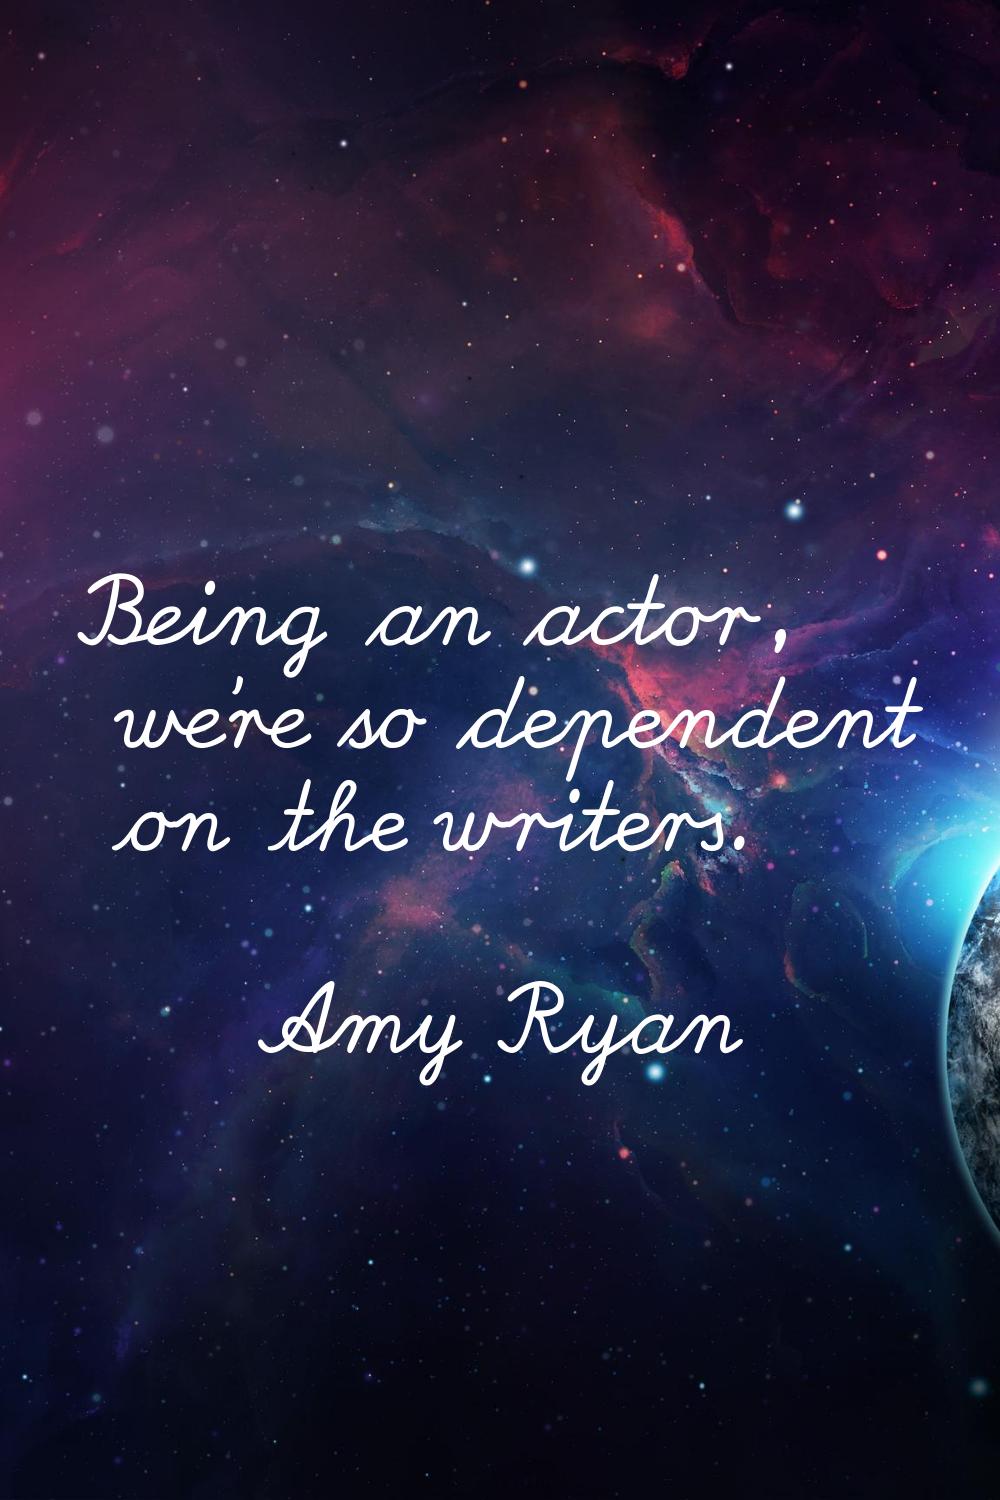 Being an actor, we're so dependent on the writers.